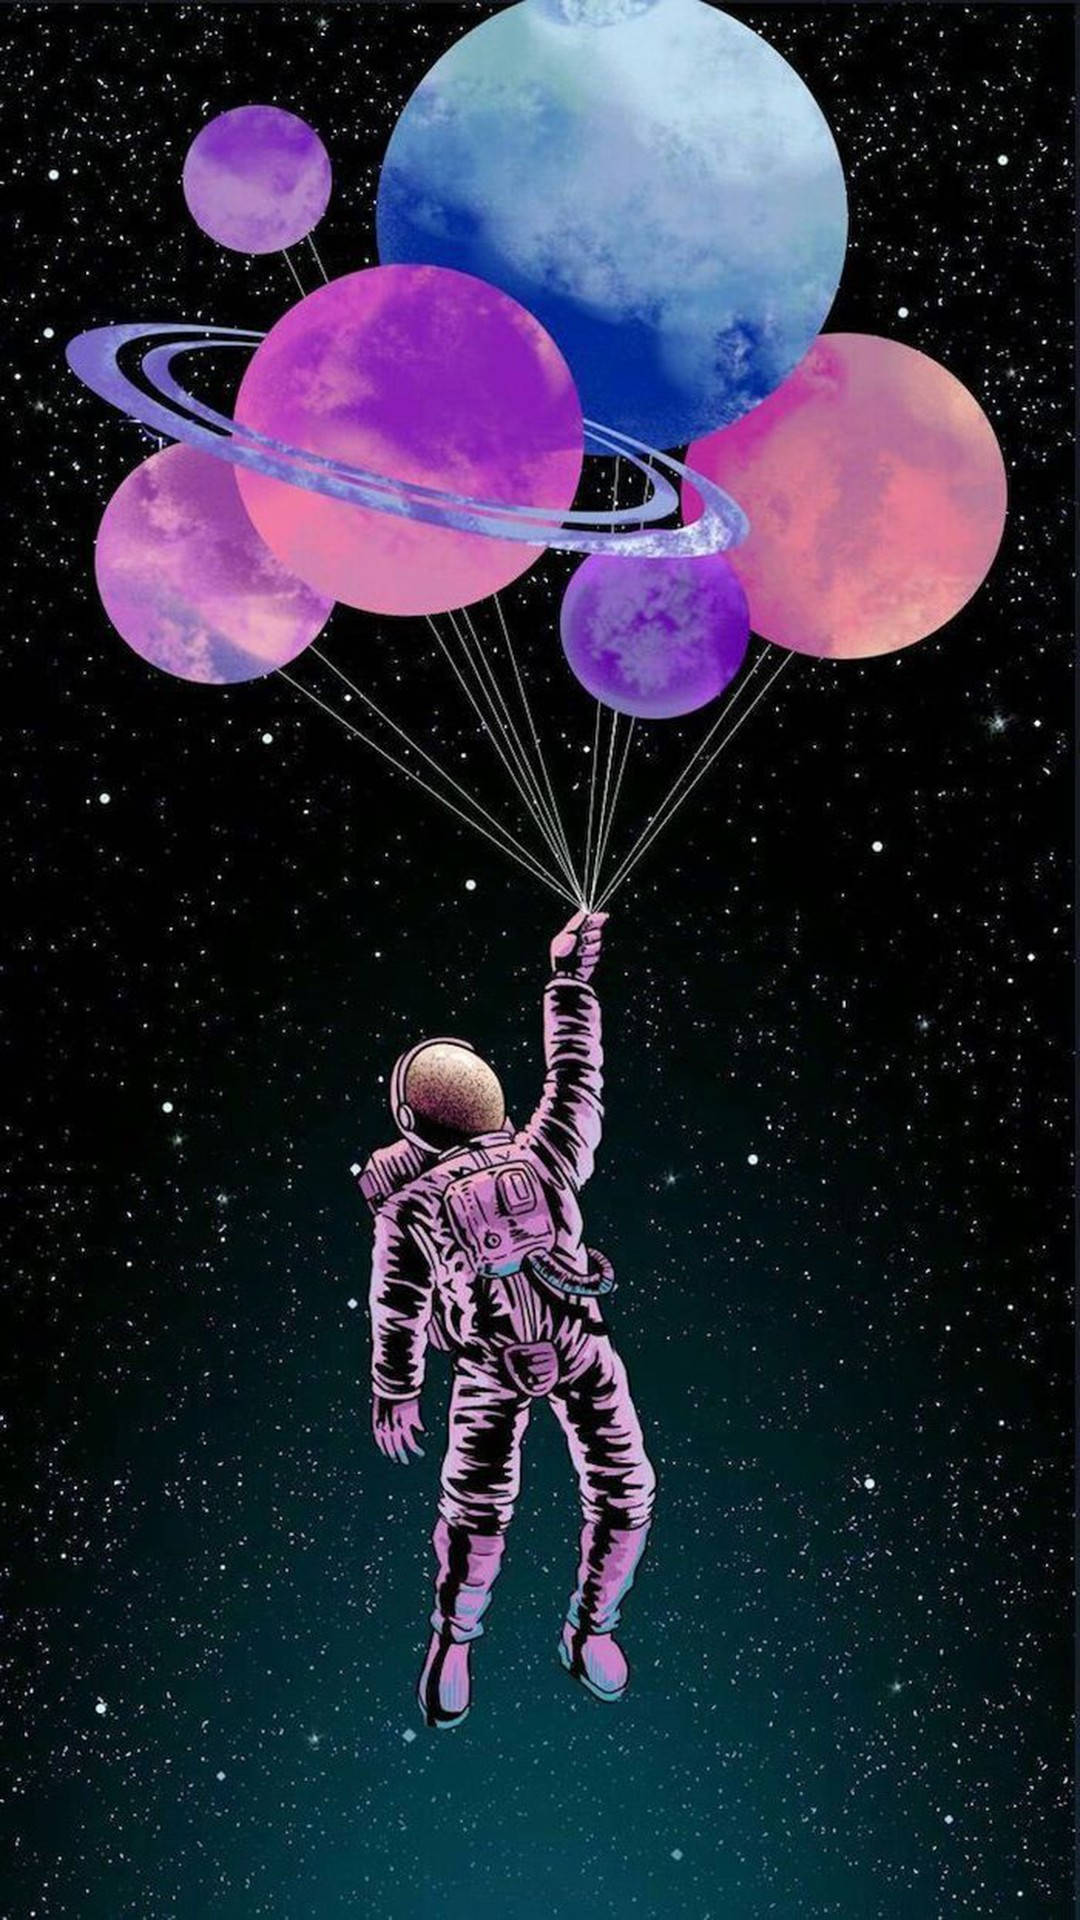 A man in space holding balloons and floating above the earth - Galaxy, balloons